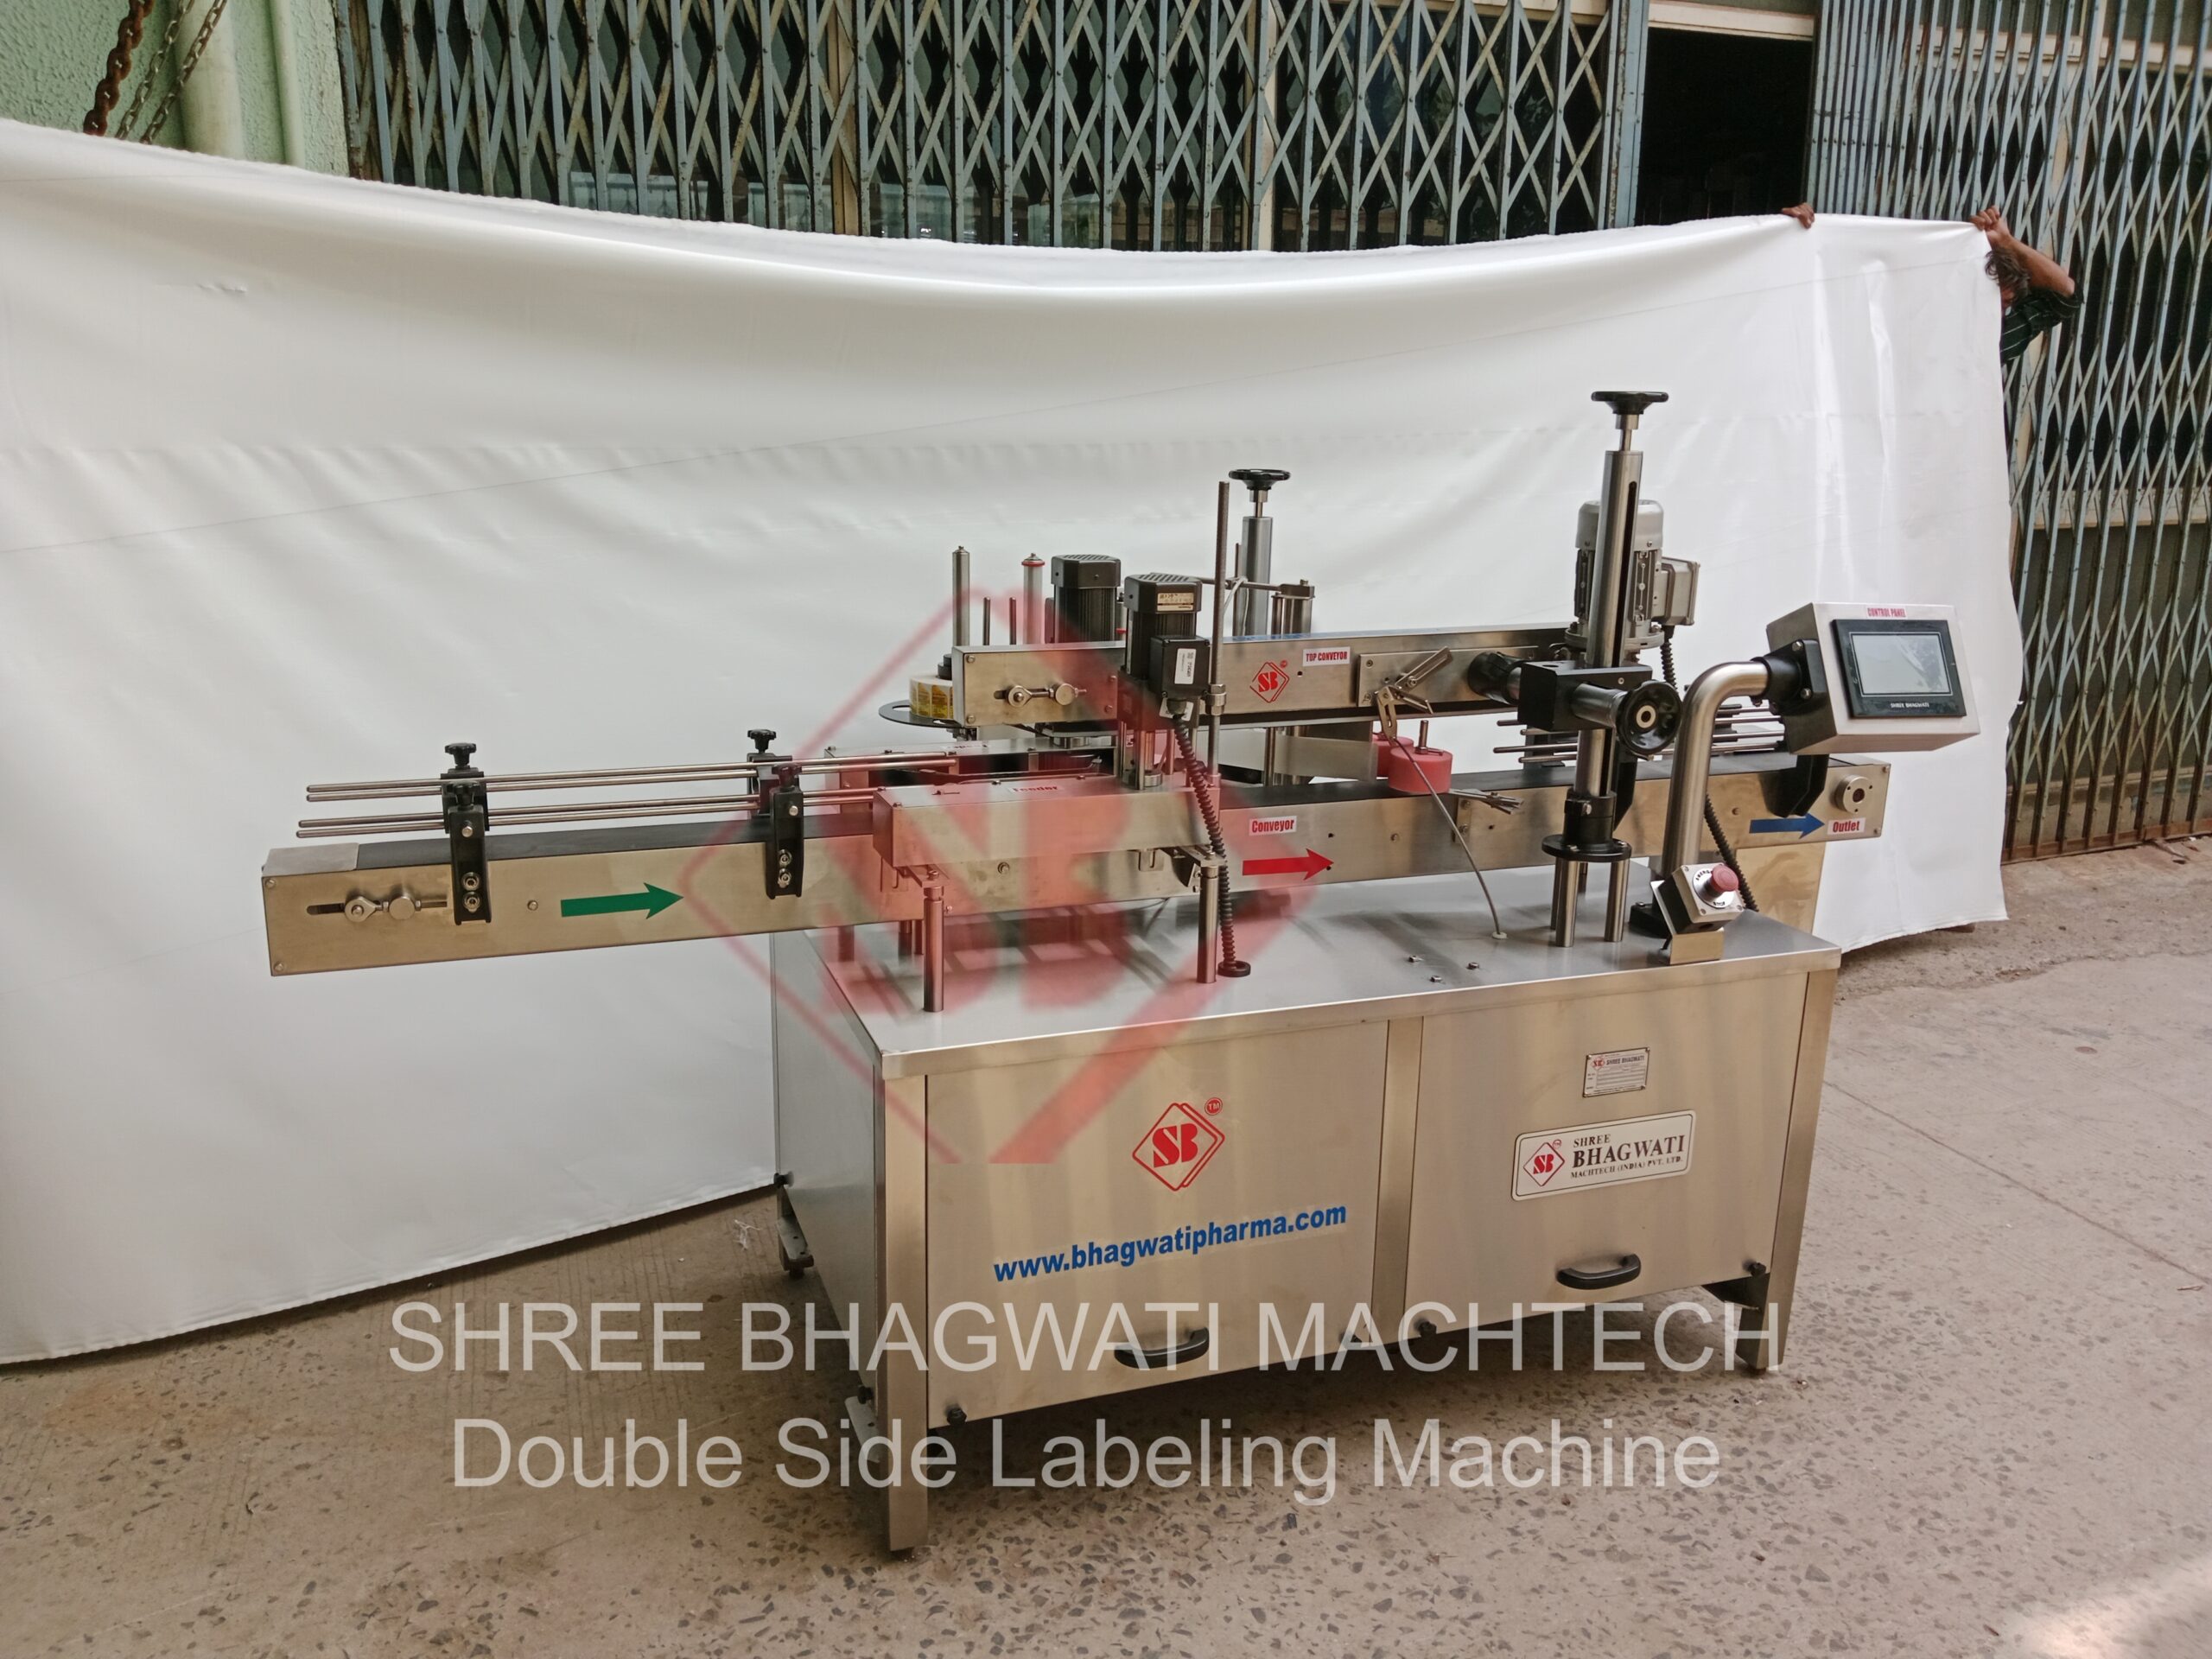 Double Side Labeling Machine Manufacturer